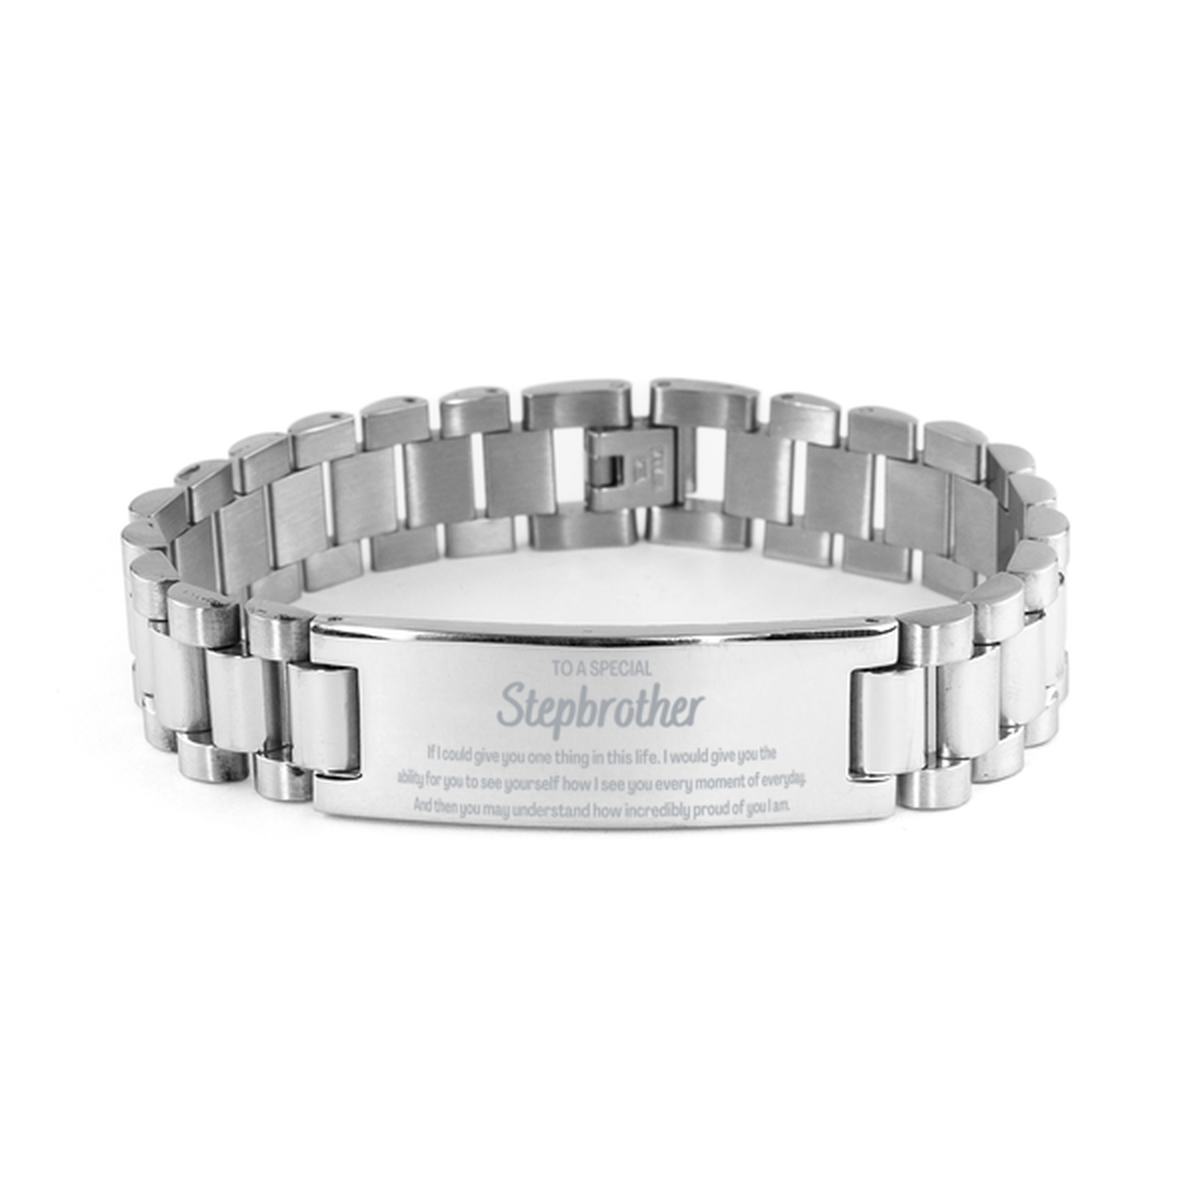 To My Stepbrother Ladder Stainless Steel Bracelet, Gifts For Stepbrother Engraved, Inspirational Gifts for Christmas Birthday, Epic Gifts for Stepbrother To A Special Stepbrother how incredibly proud of you I am